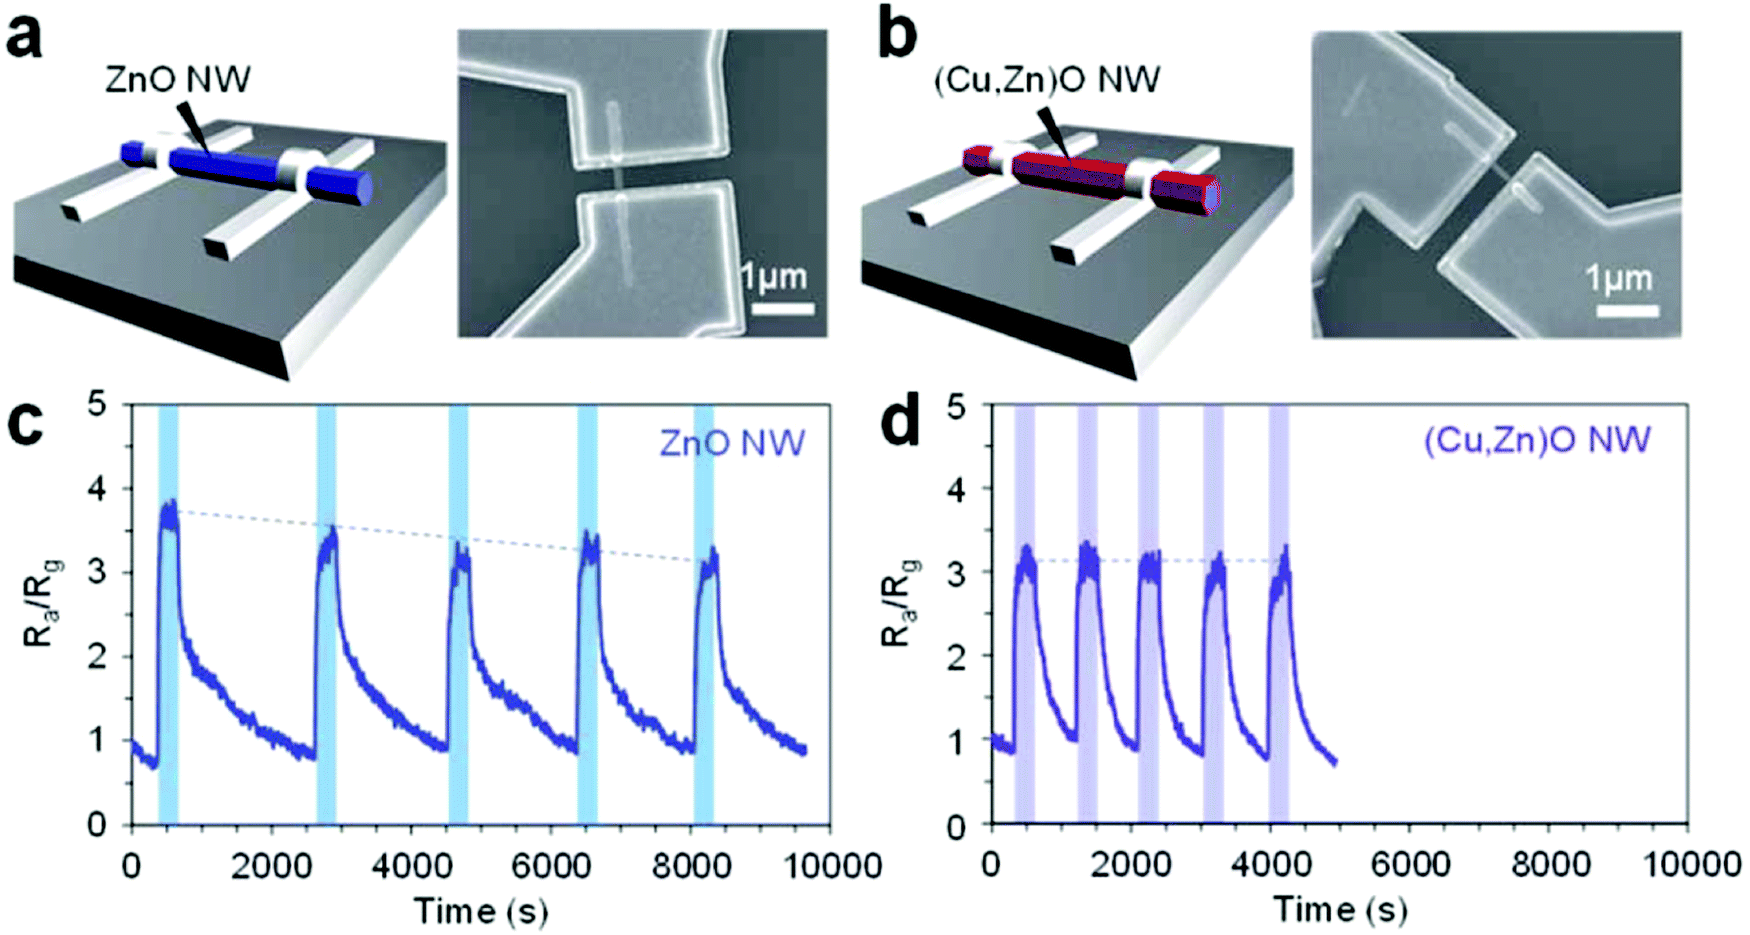 Oxide nanowire microfluidics addressing previously-unattainable analytical  methods for biomolecules towards liquid biopsy - Chemical Communications  (RSC Publishing) DOI:10.1039/D1CC05096F